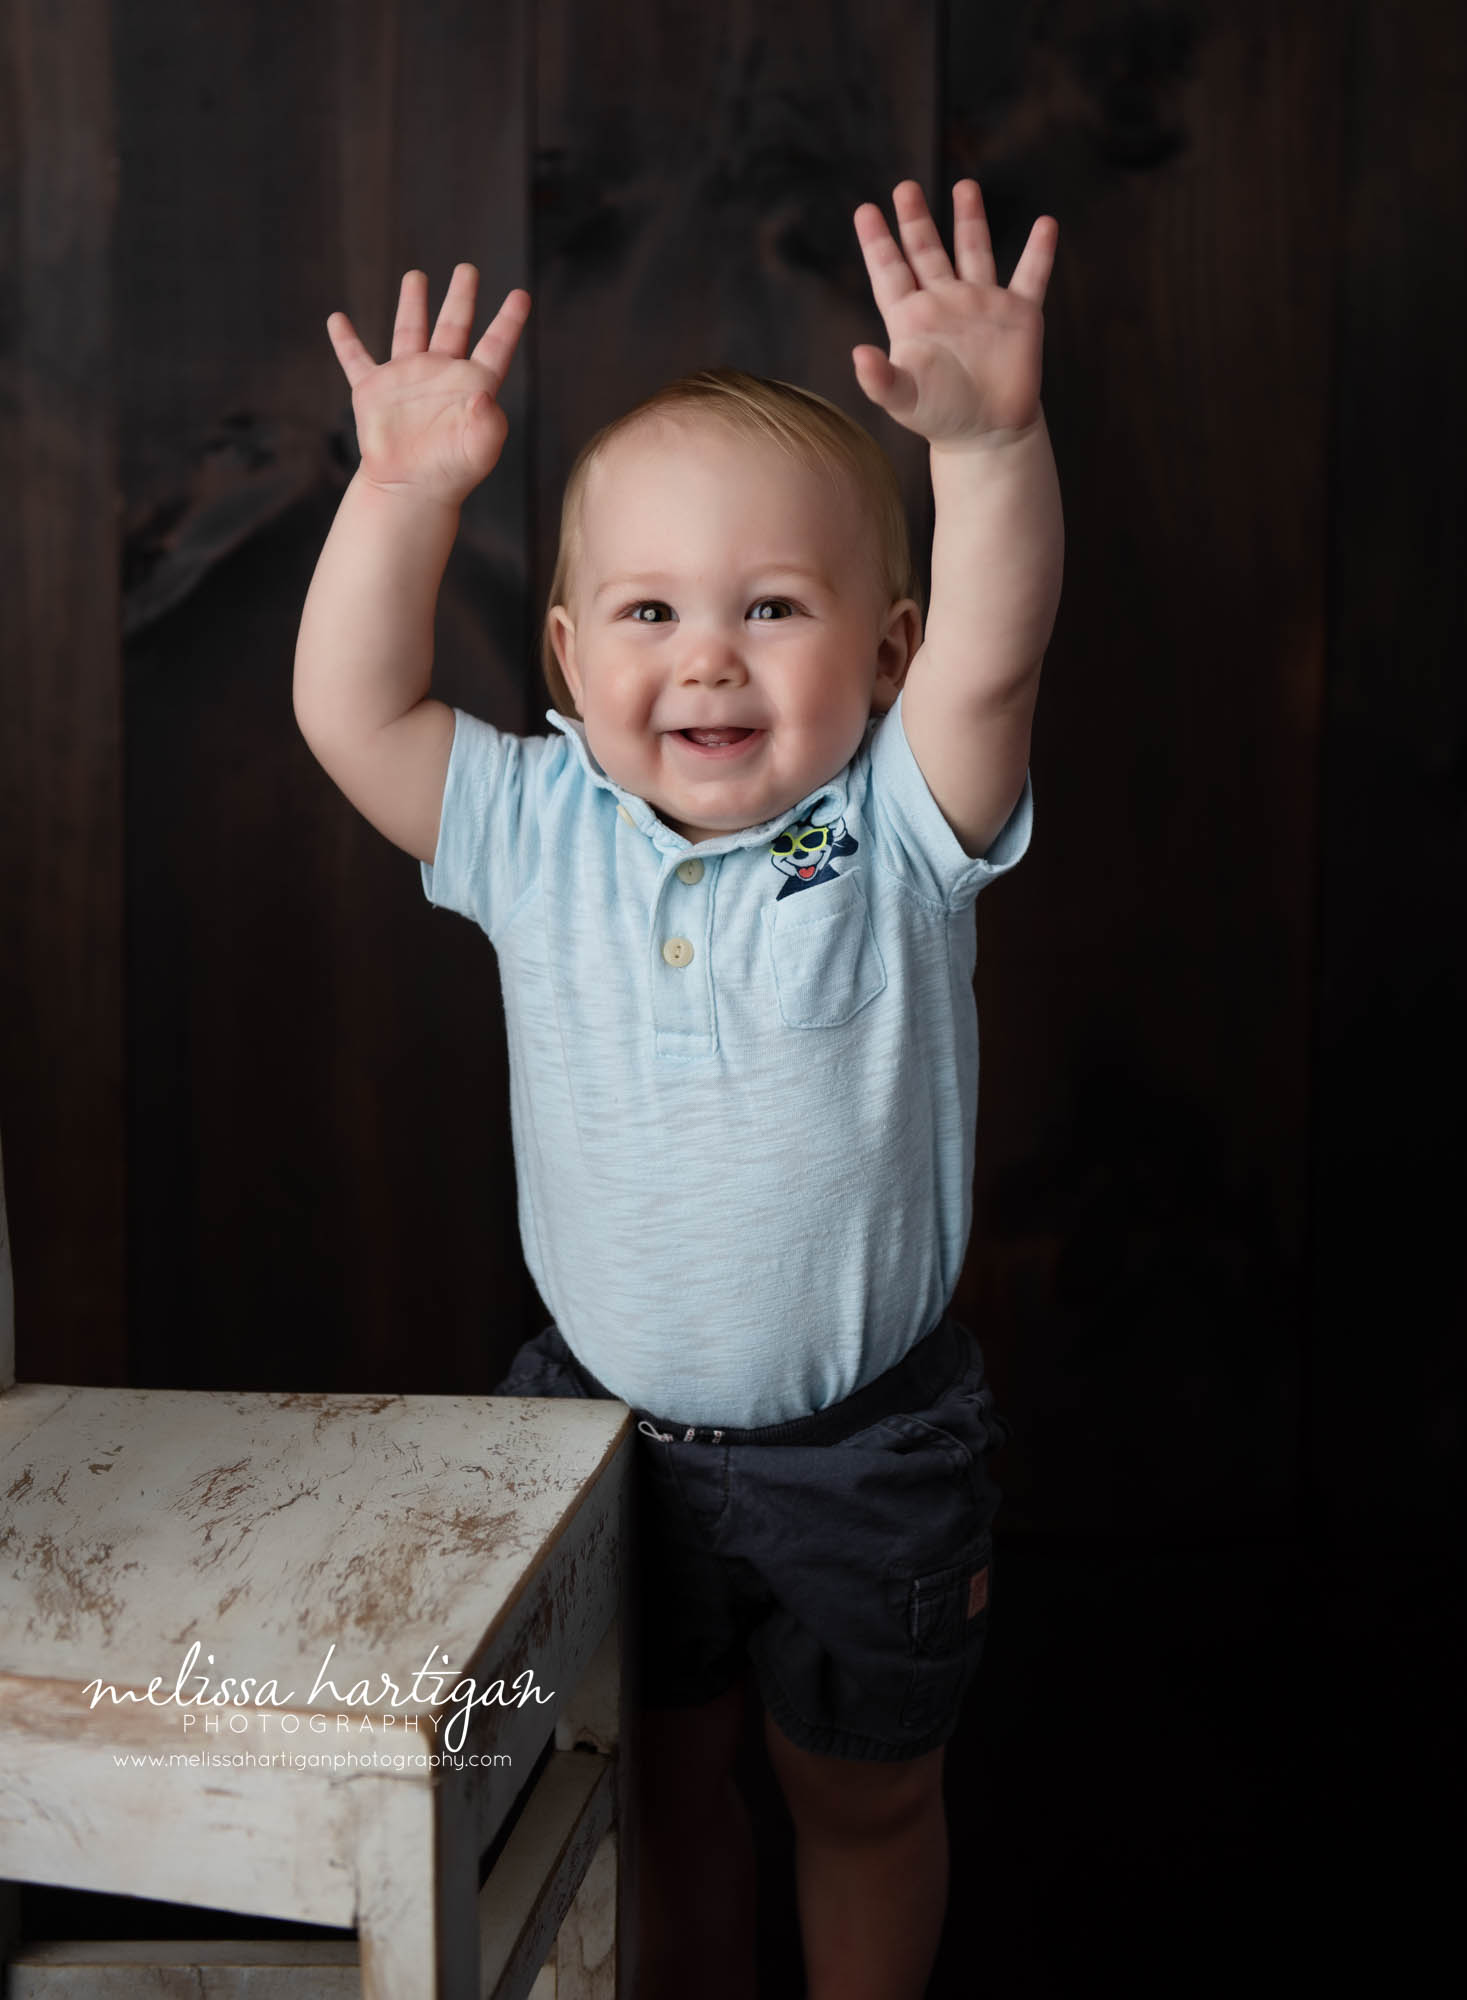 baby boy holding hands up in the air baby milestone photography session